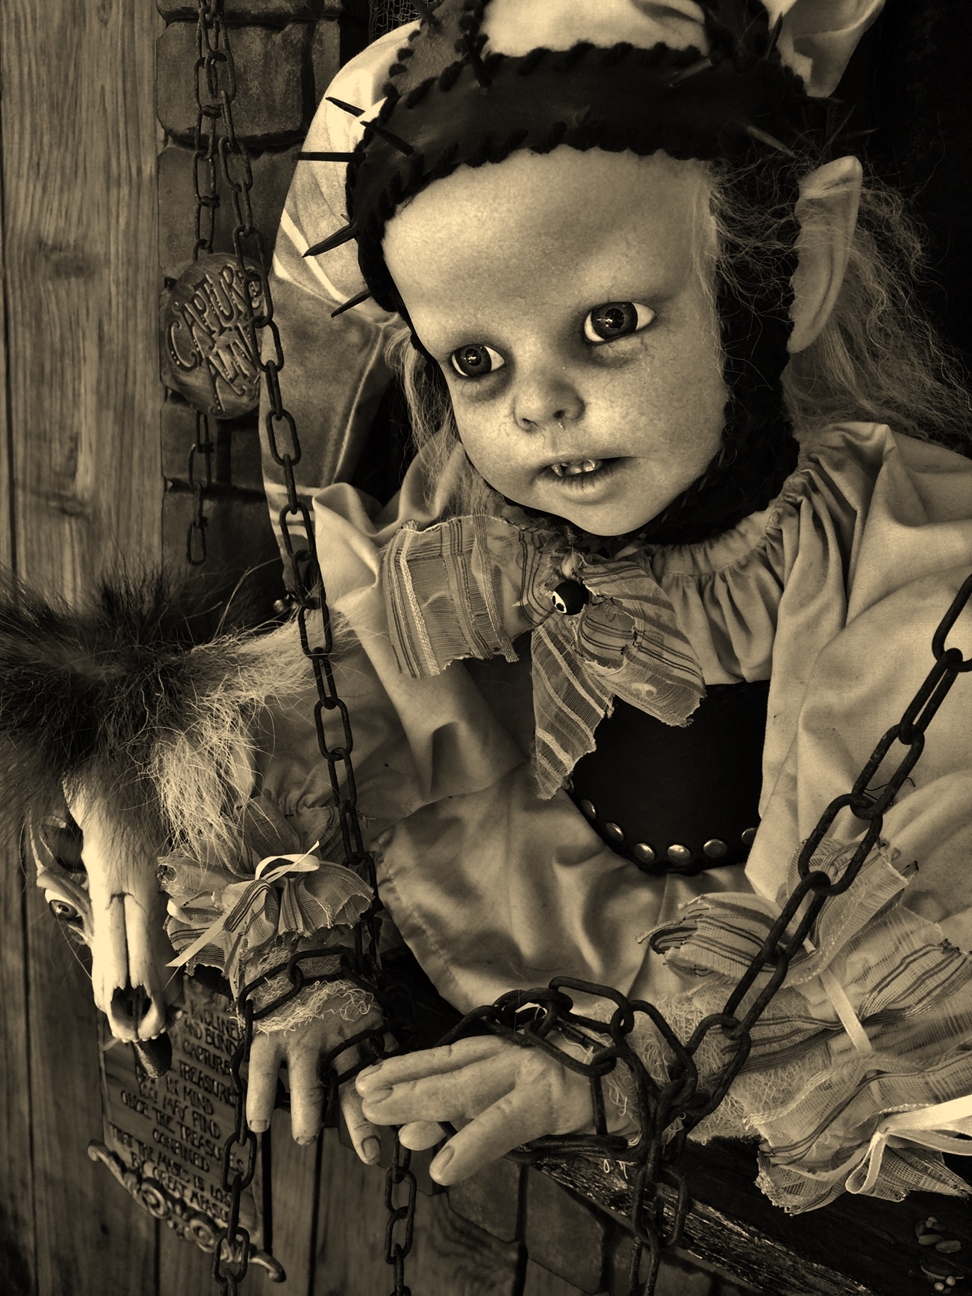 black and white image close-up gothic artdoll wearing white jester cap stands in window with chains